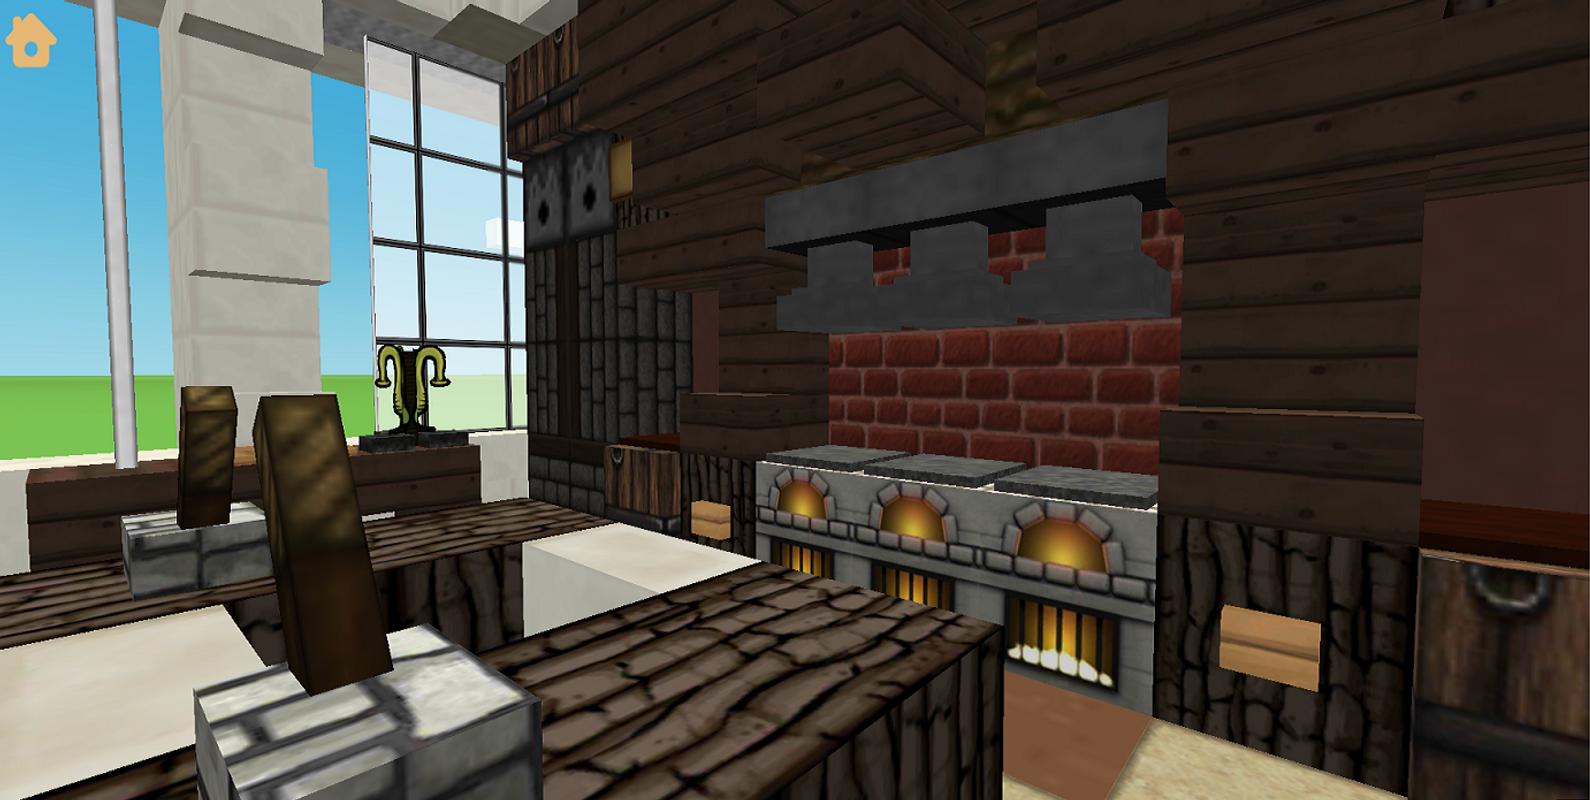 Penthouse build ideas for Minecraft for Android - APK Download